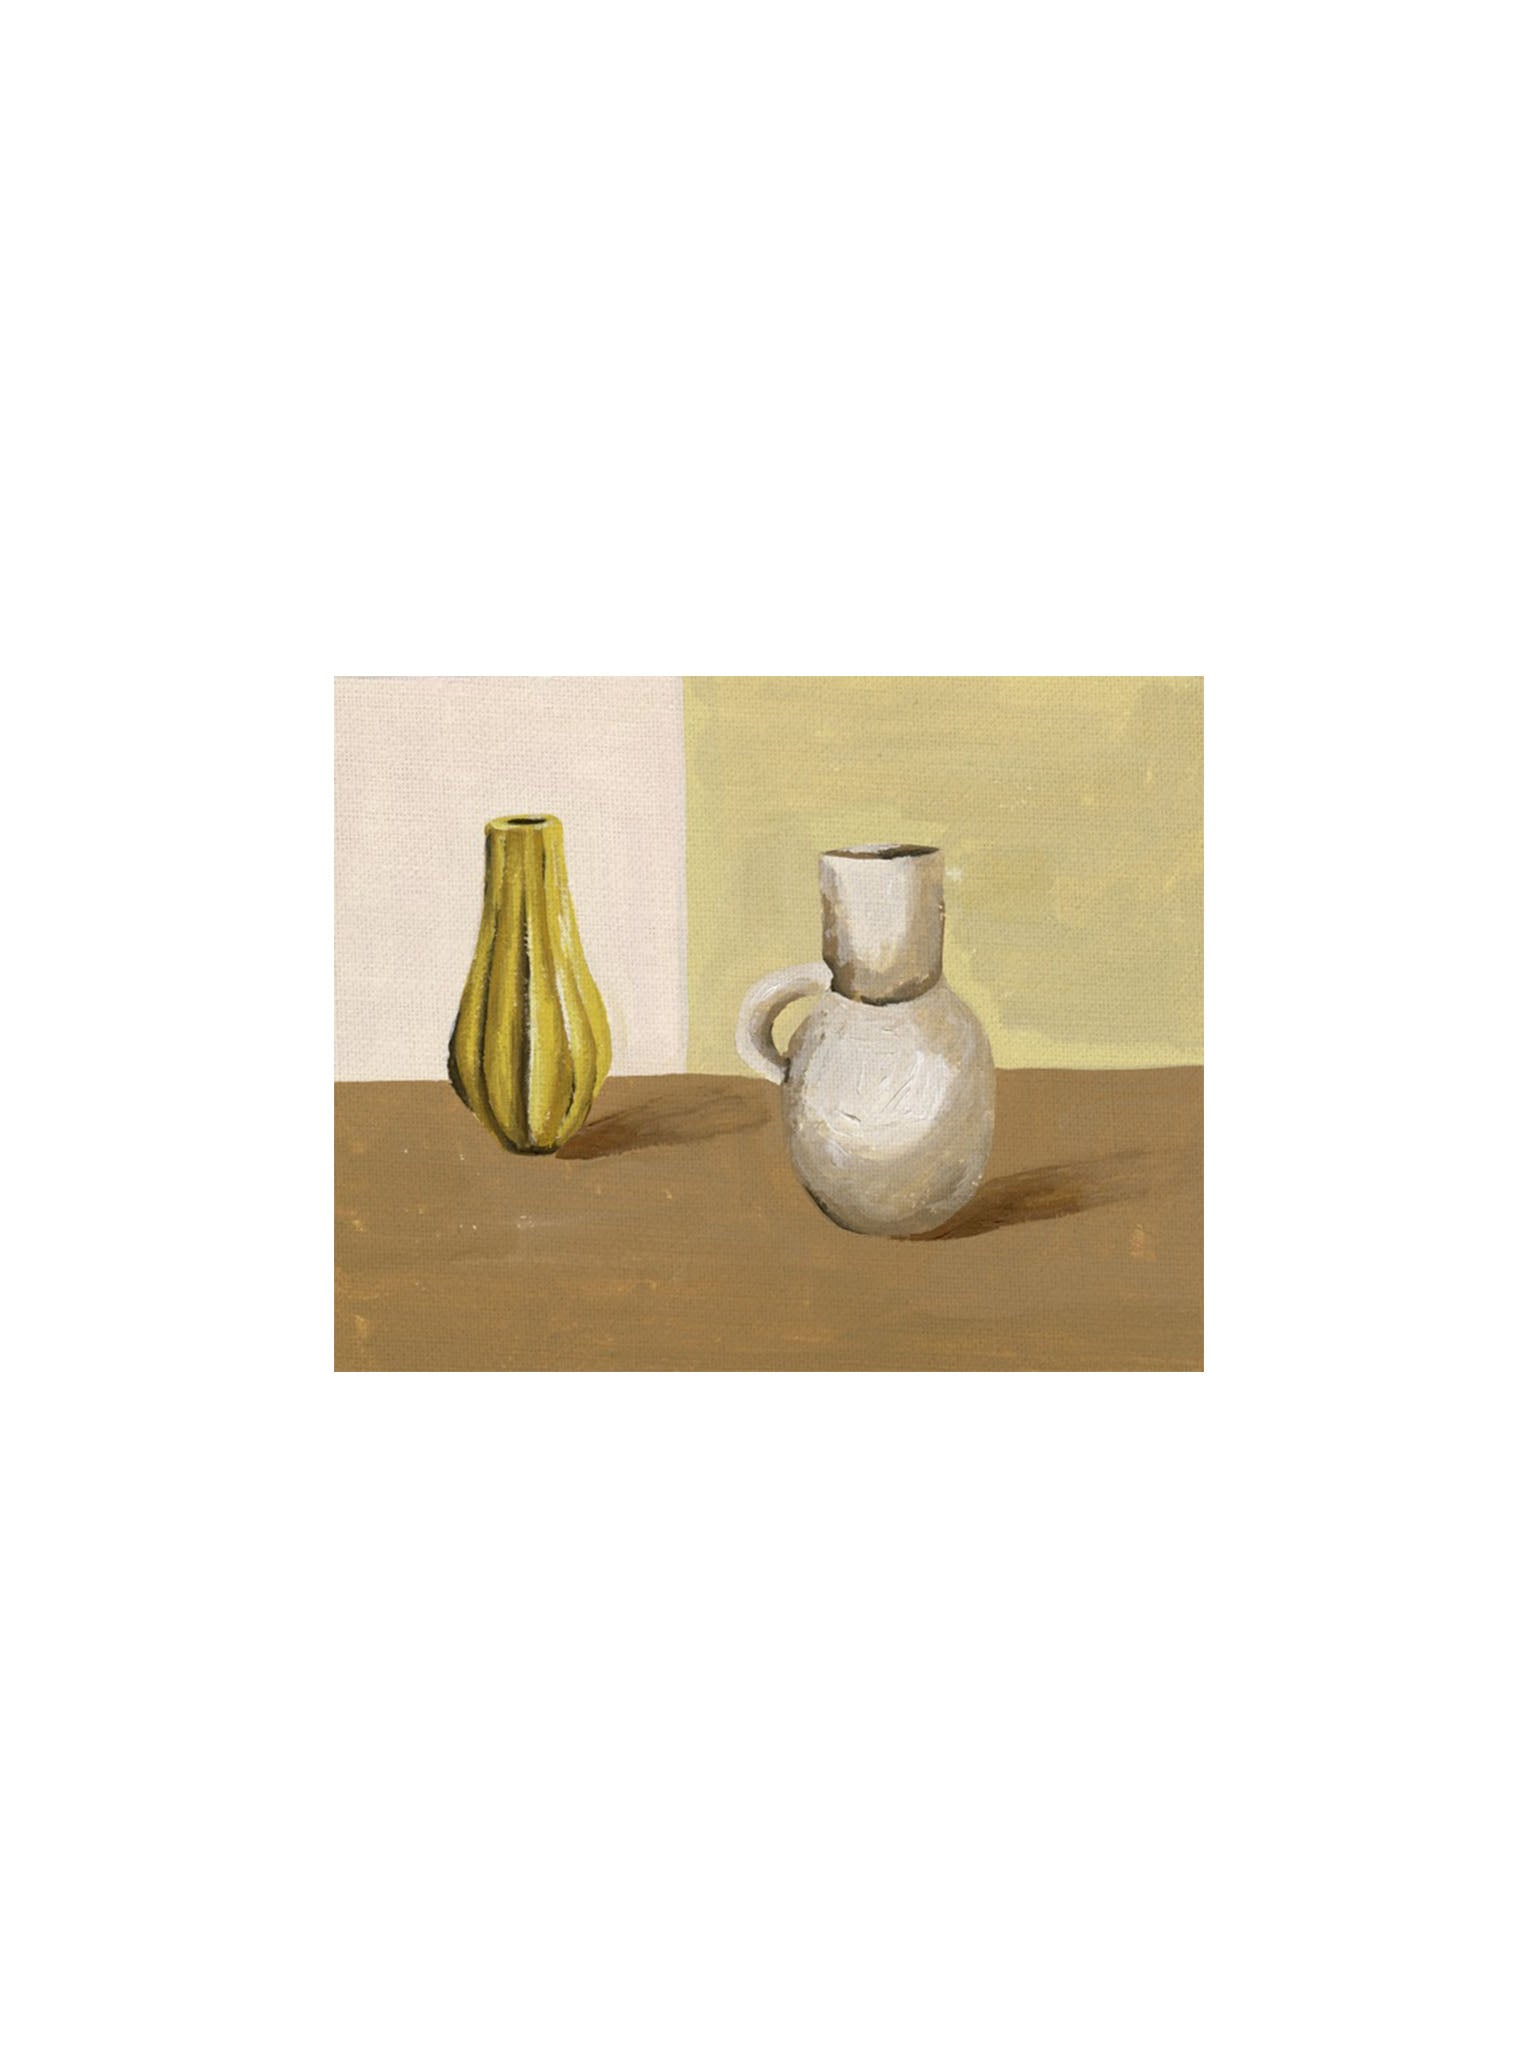 art print of a bottle and vase